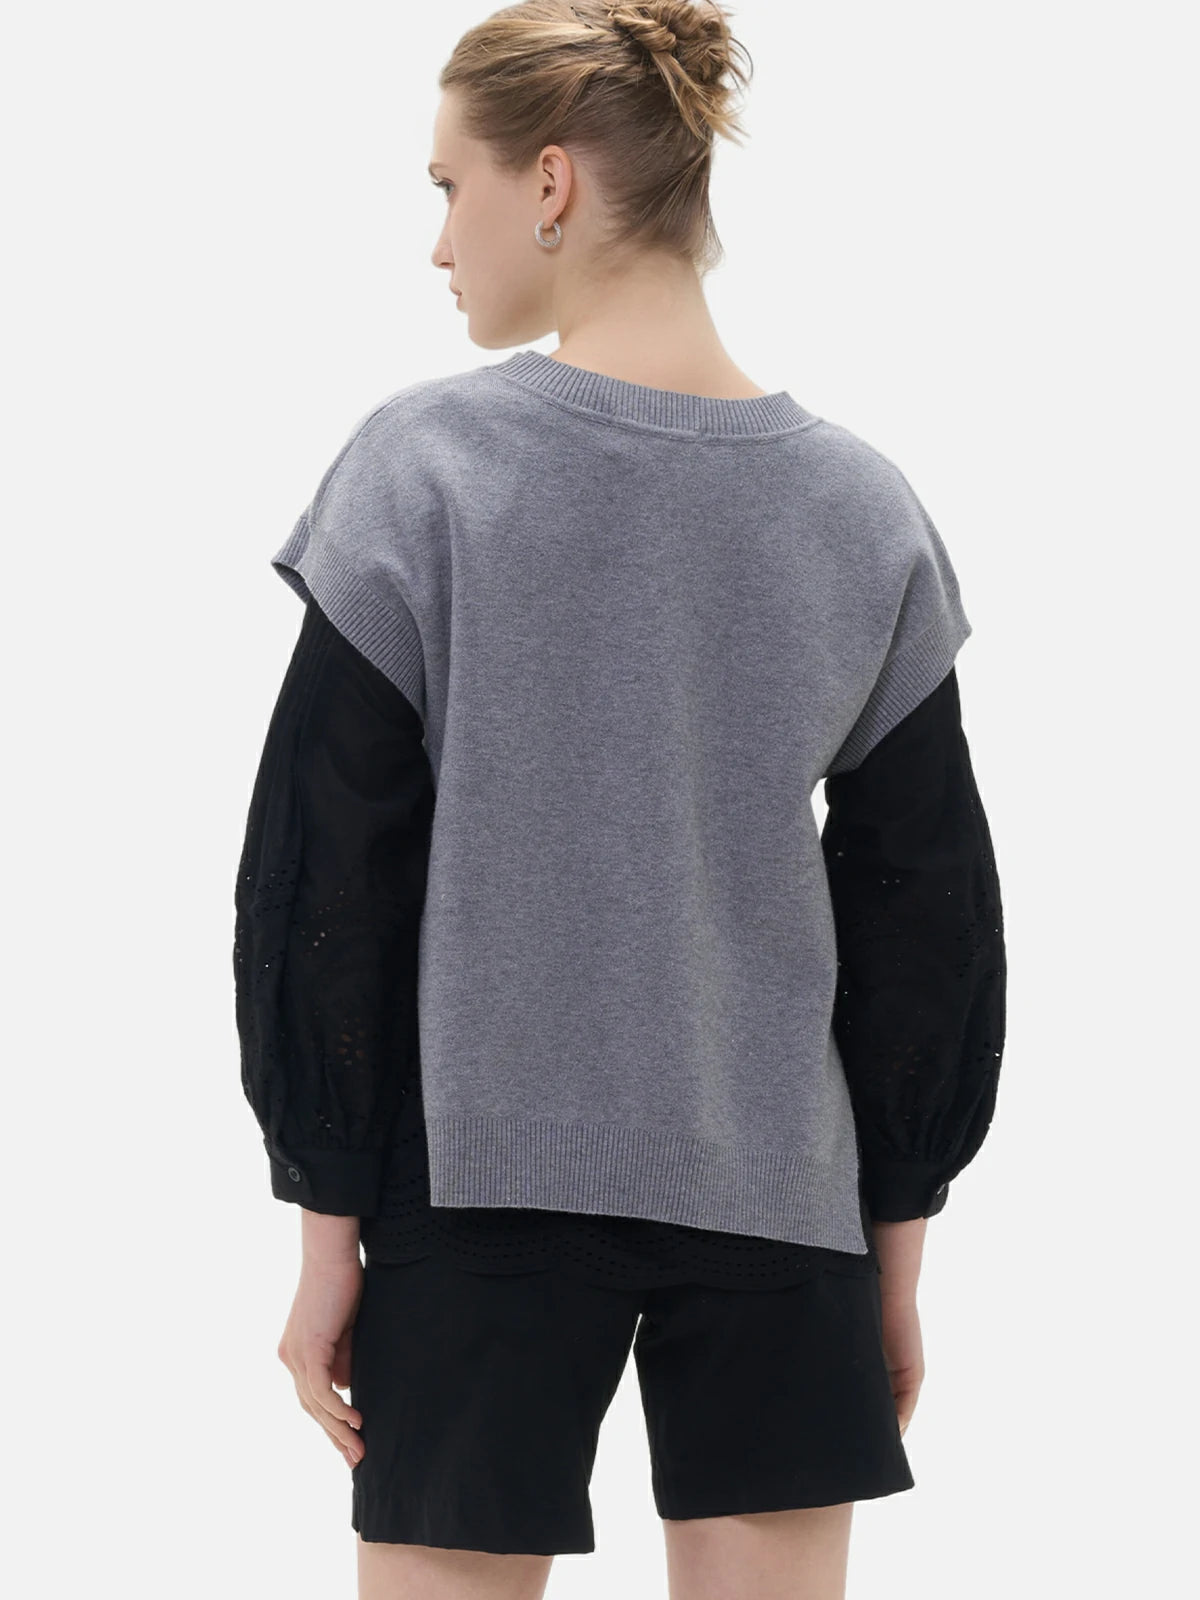 A casual yet stylish dropped-shoulder gray sweater complements the chic black shirt